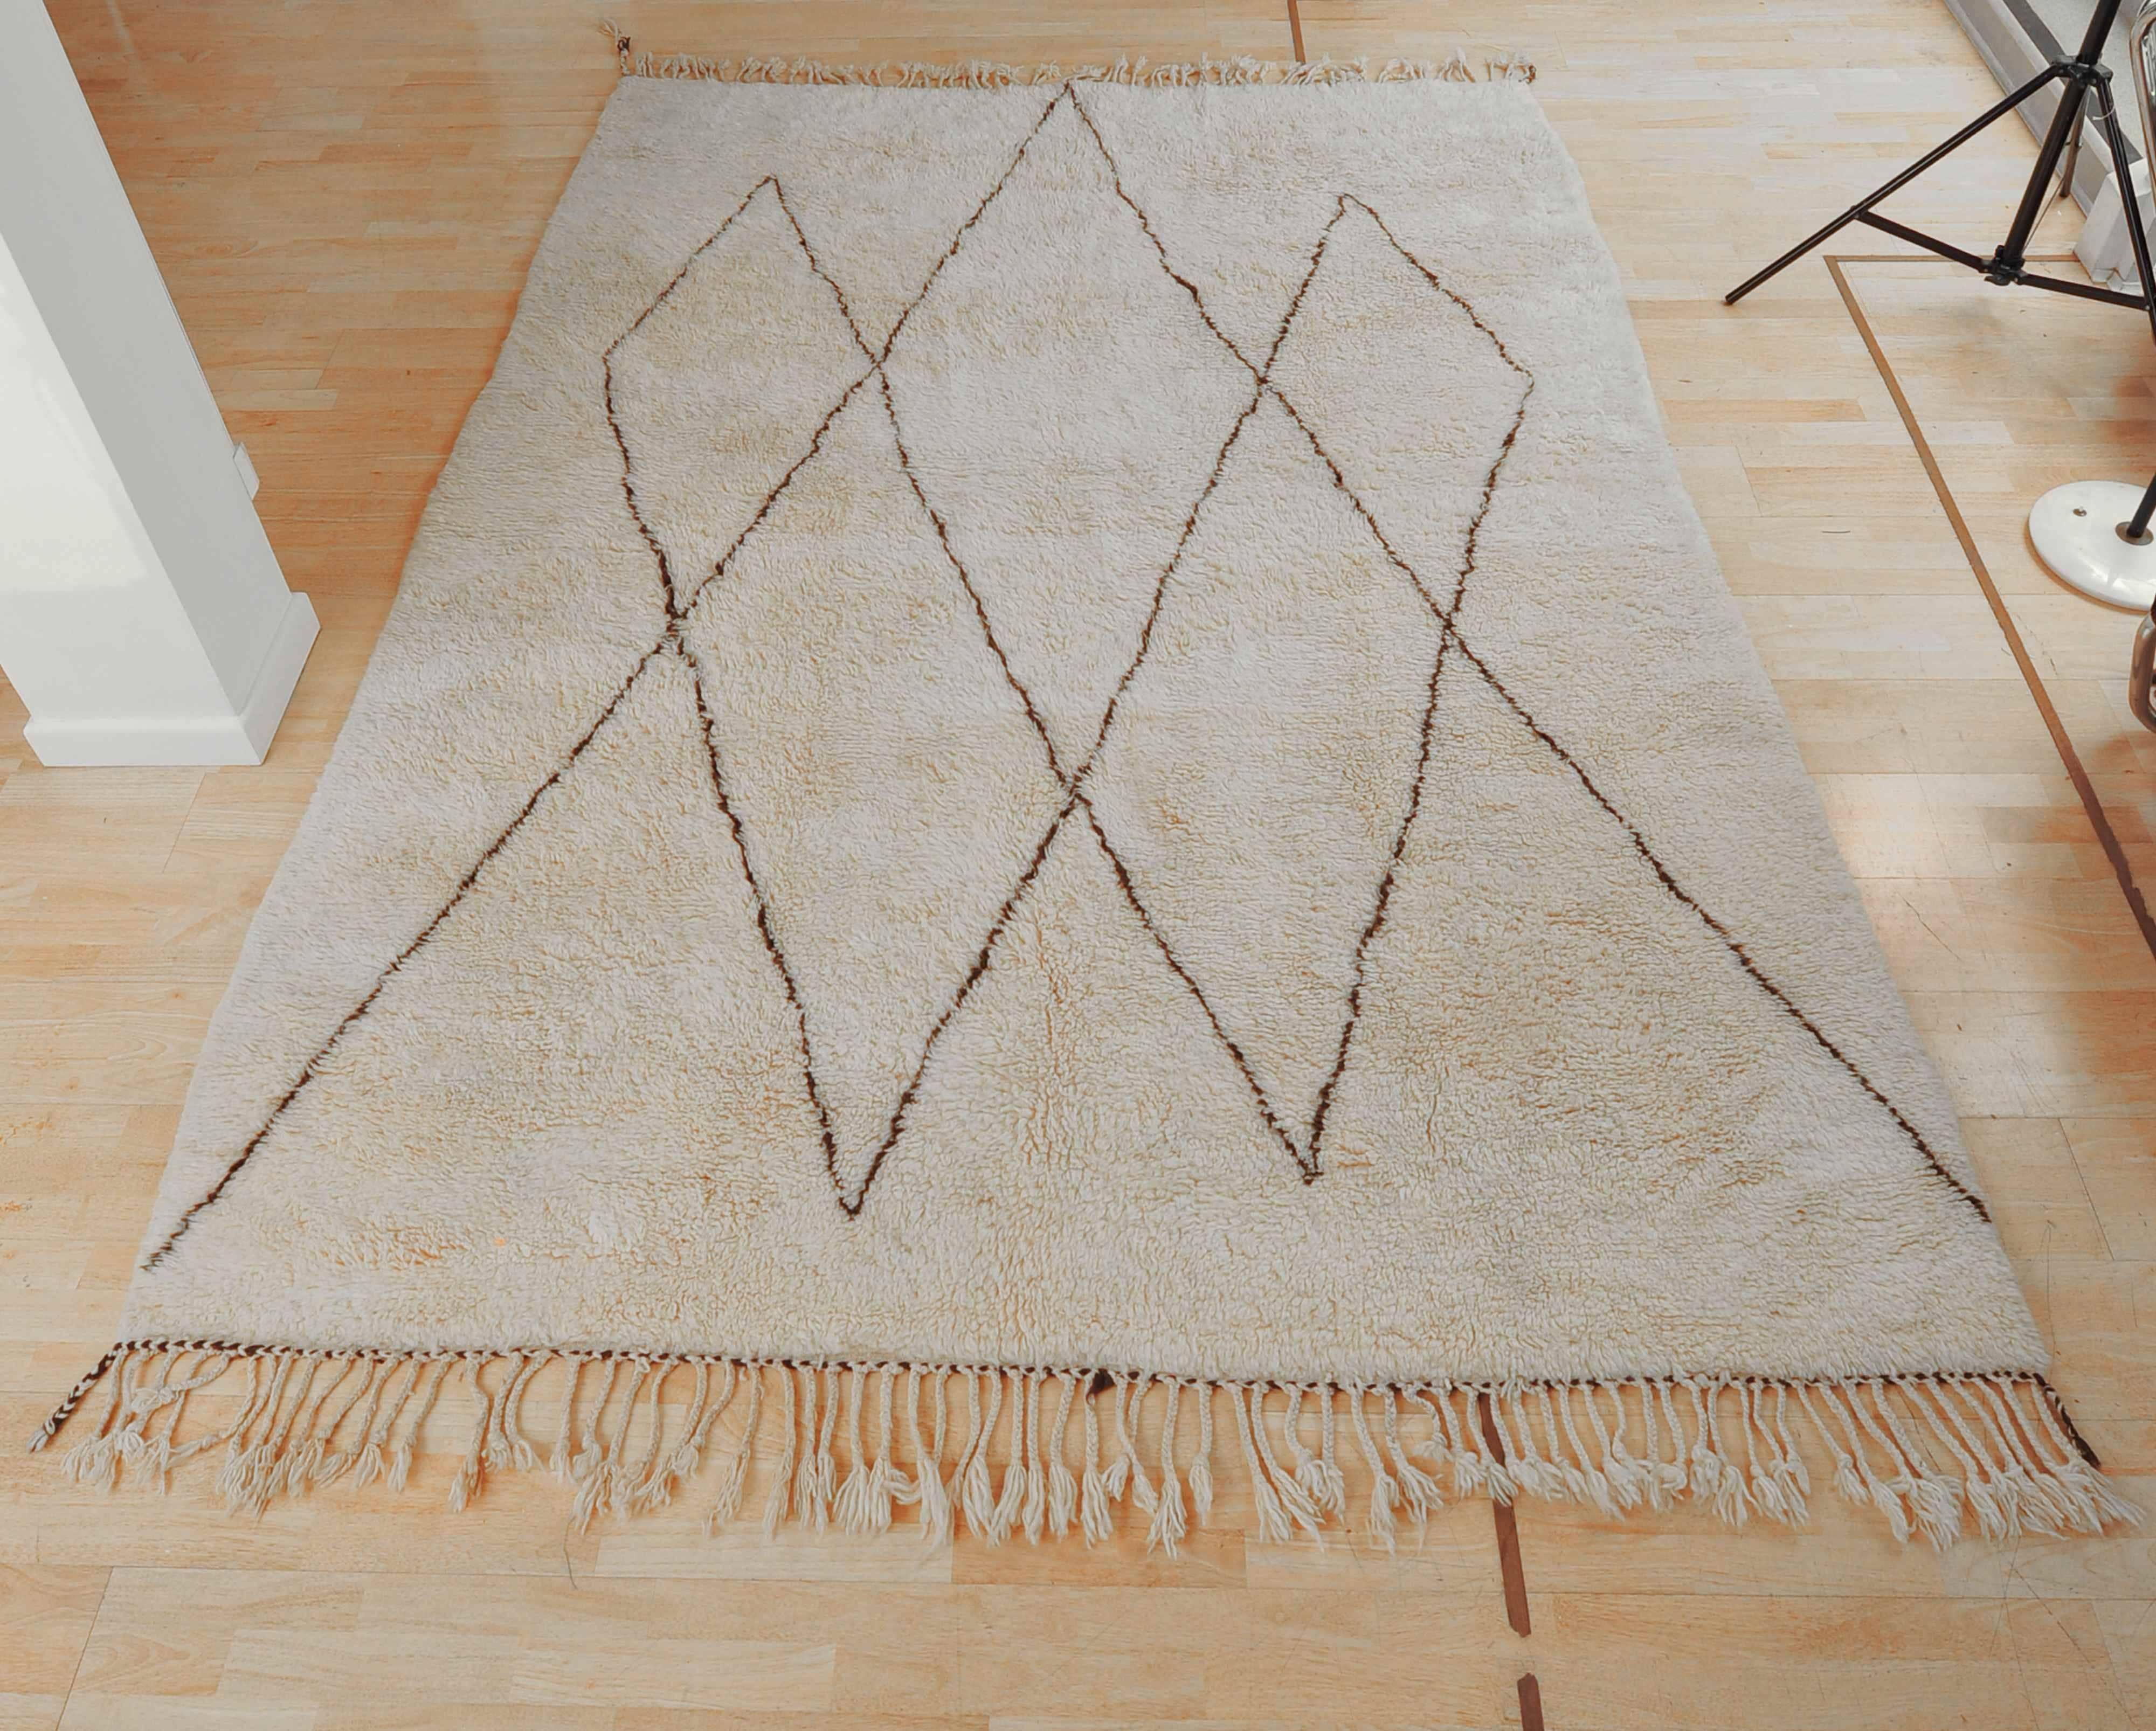 Good quality contemporary Beni Ourain rug from the Atlas mountains,

Moroccan, Berber.

100% wool hand-knotted. 
(medium density of knots.)

Depth of pile 3.5 cm
Weight - 20 kilos